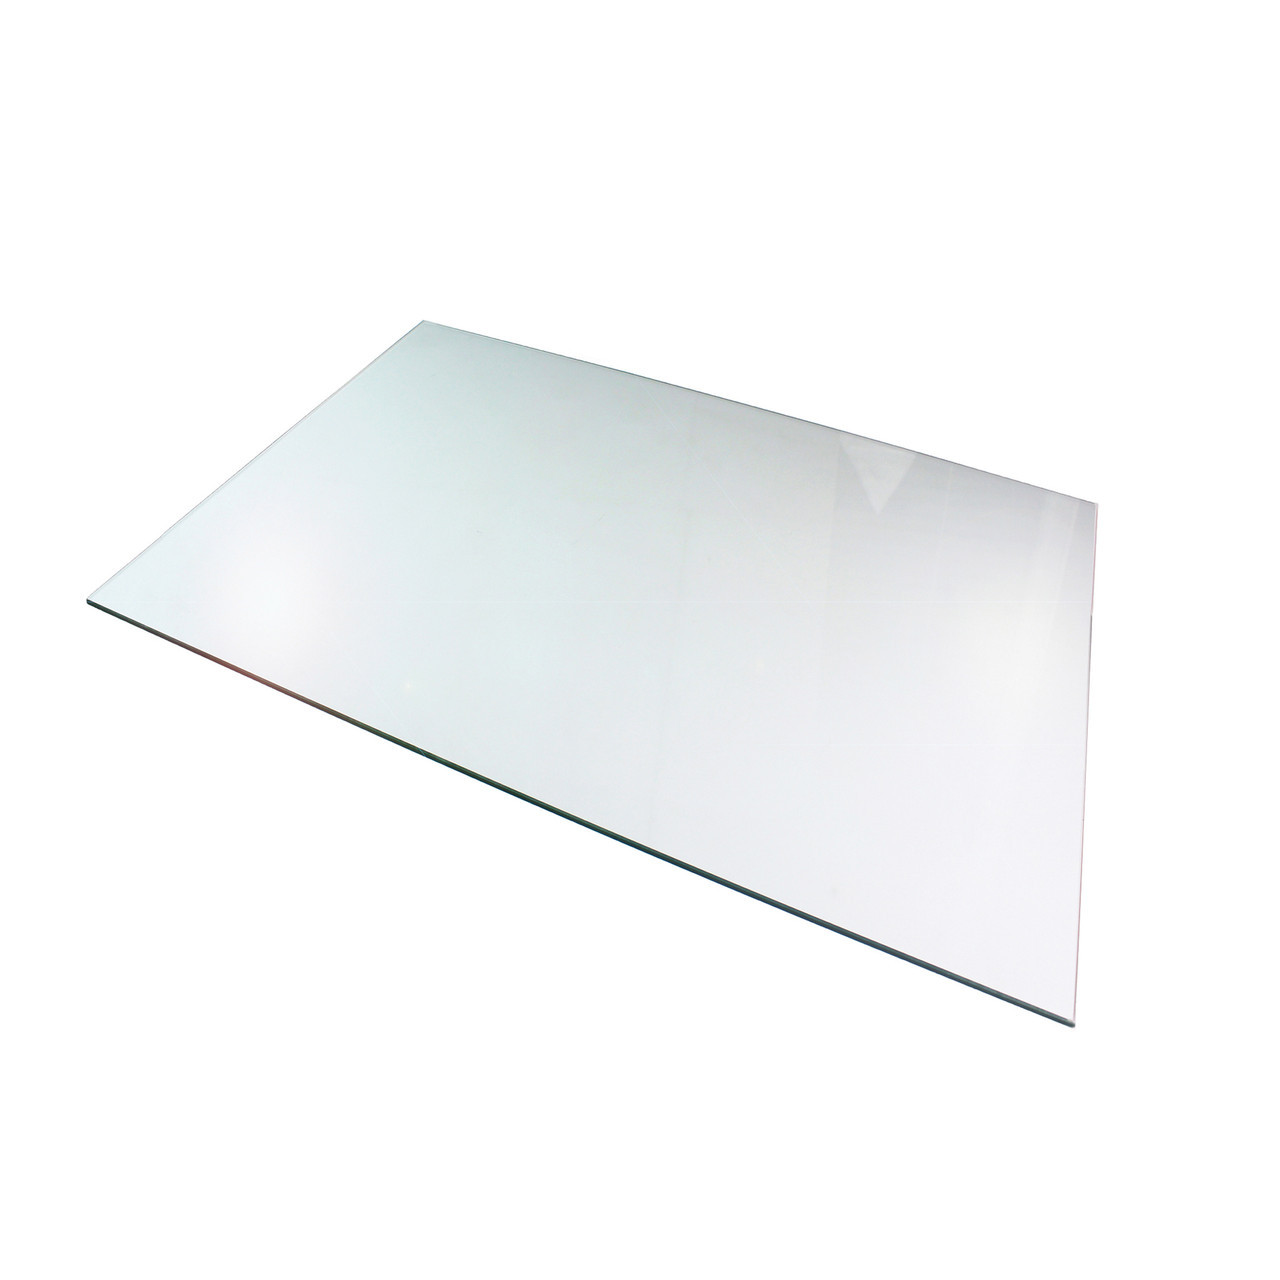 Thick transparent silicone rubber sheets Bath Mat